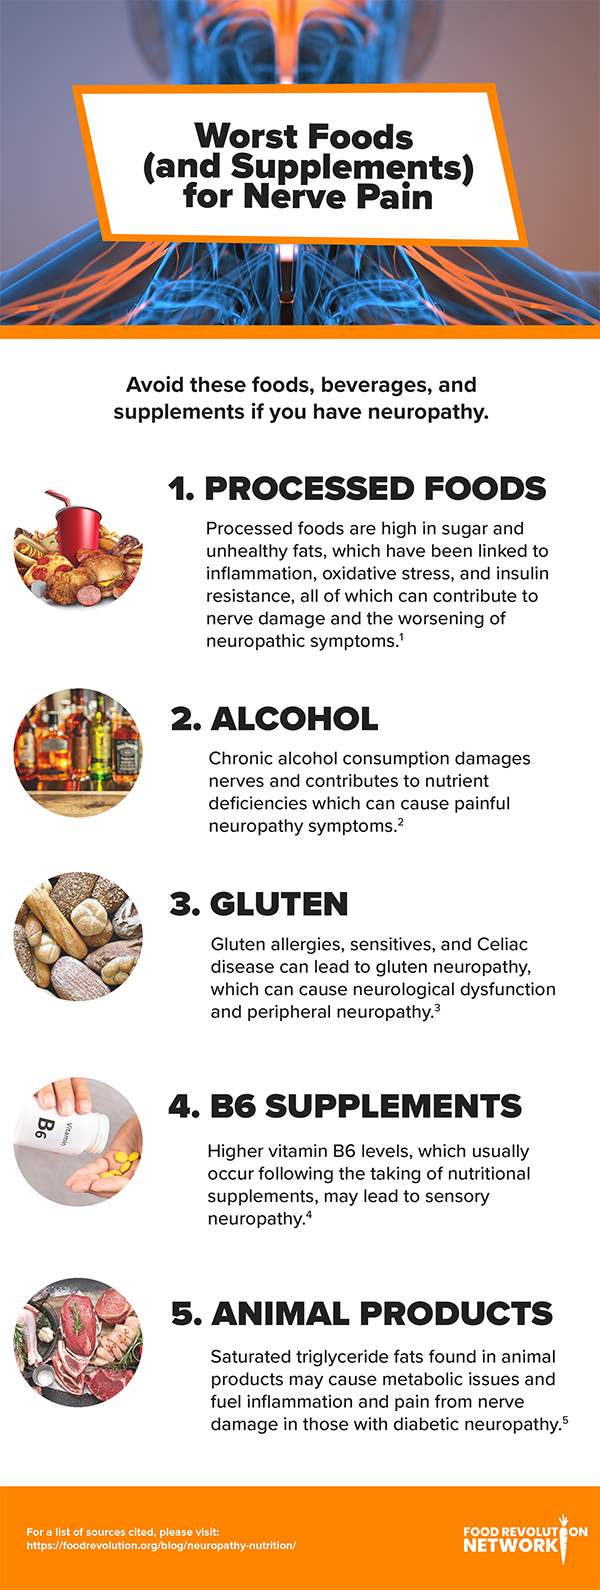 Worst Foods for Neuropathy infographic